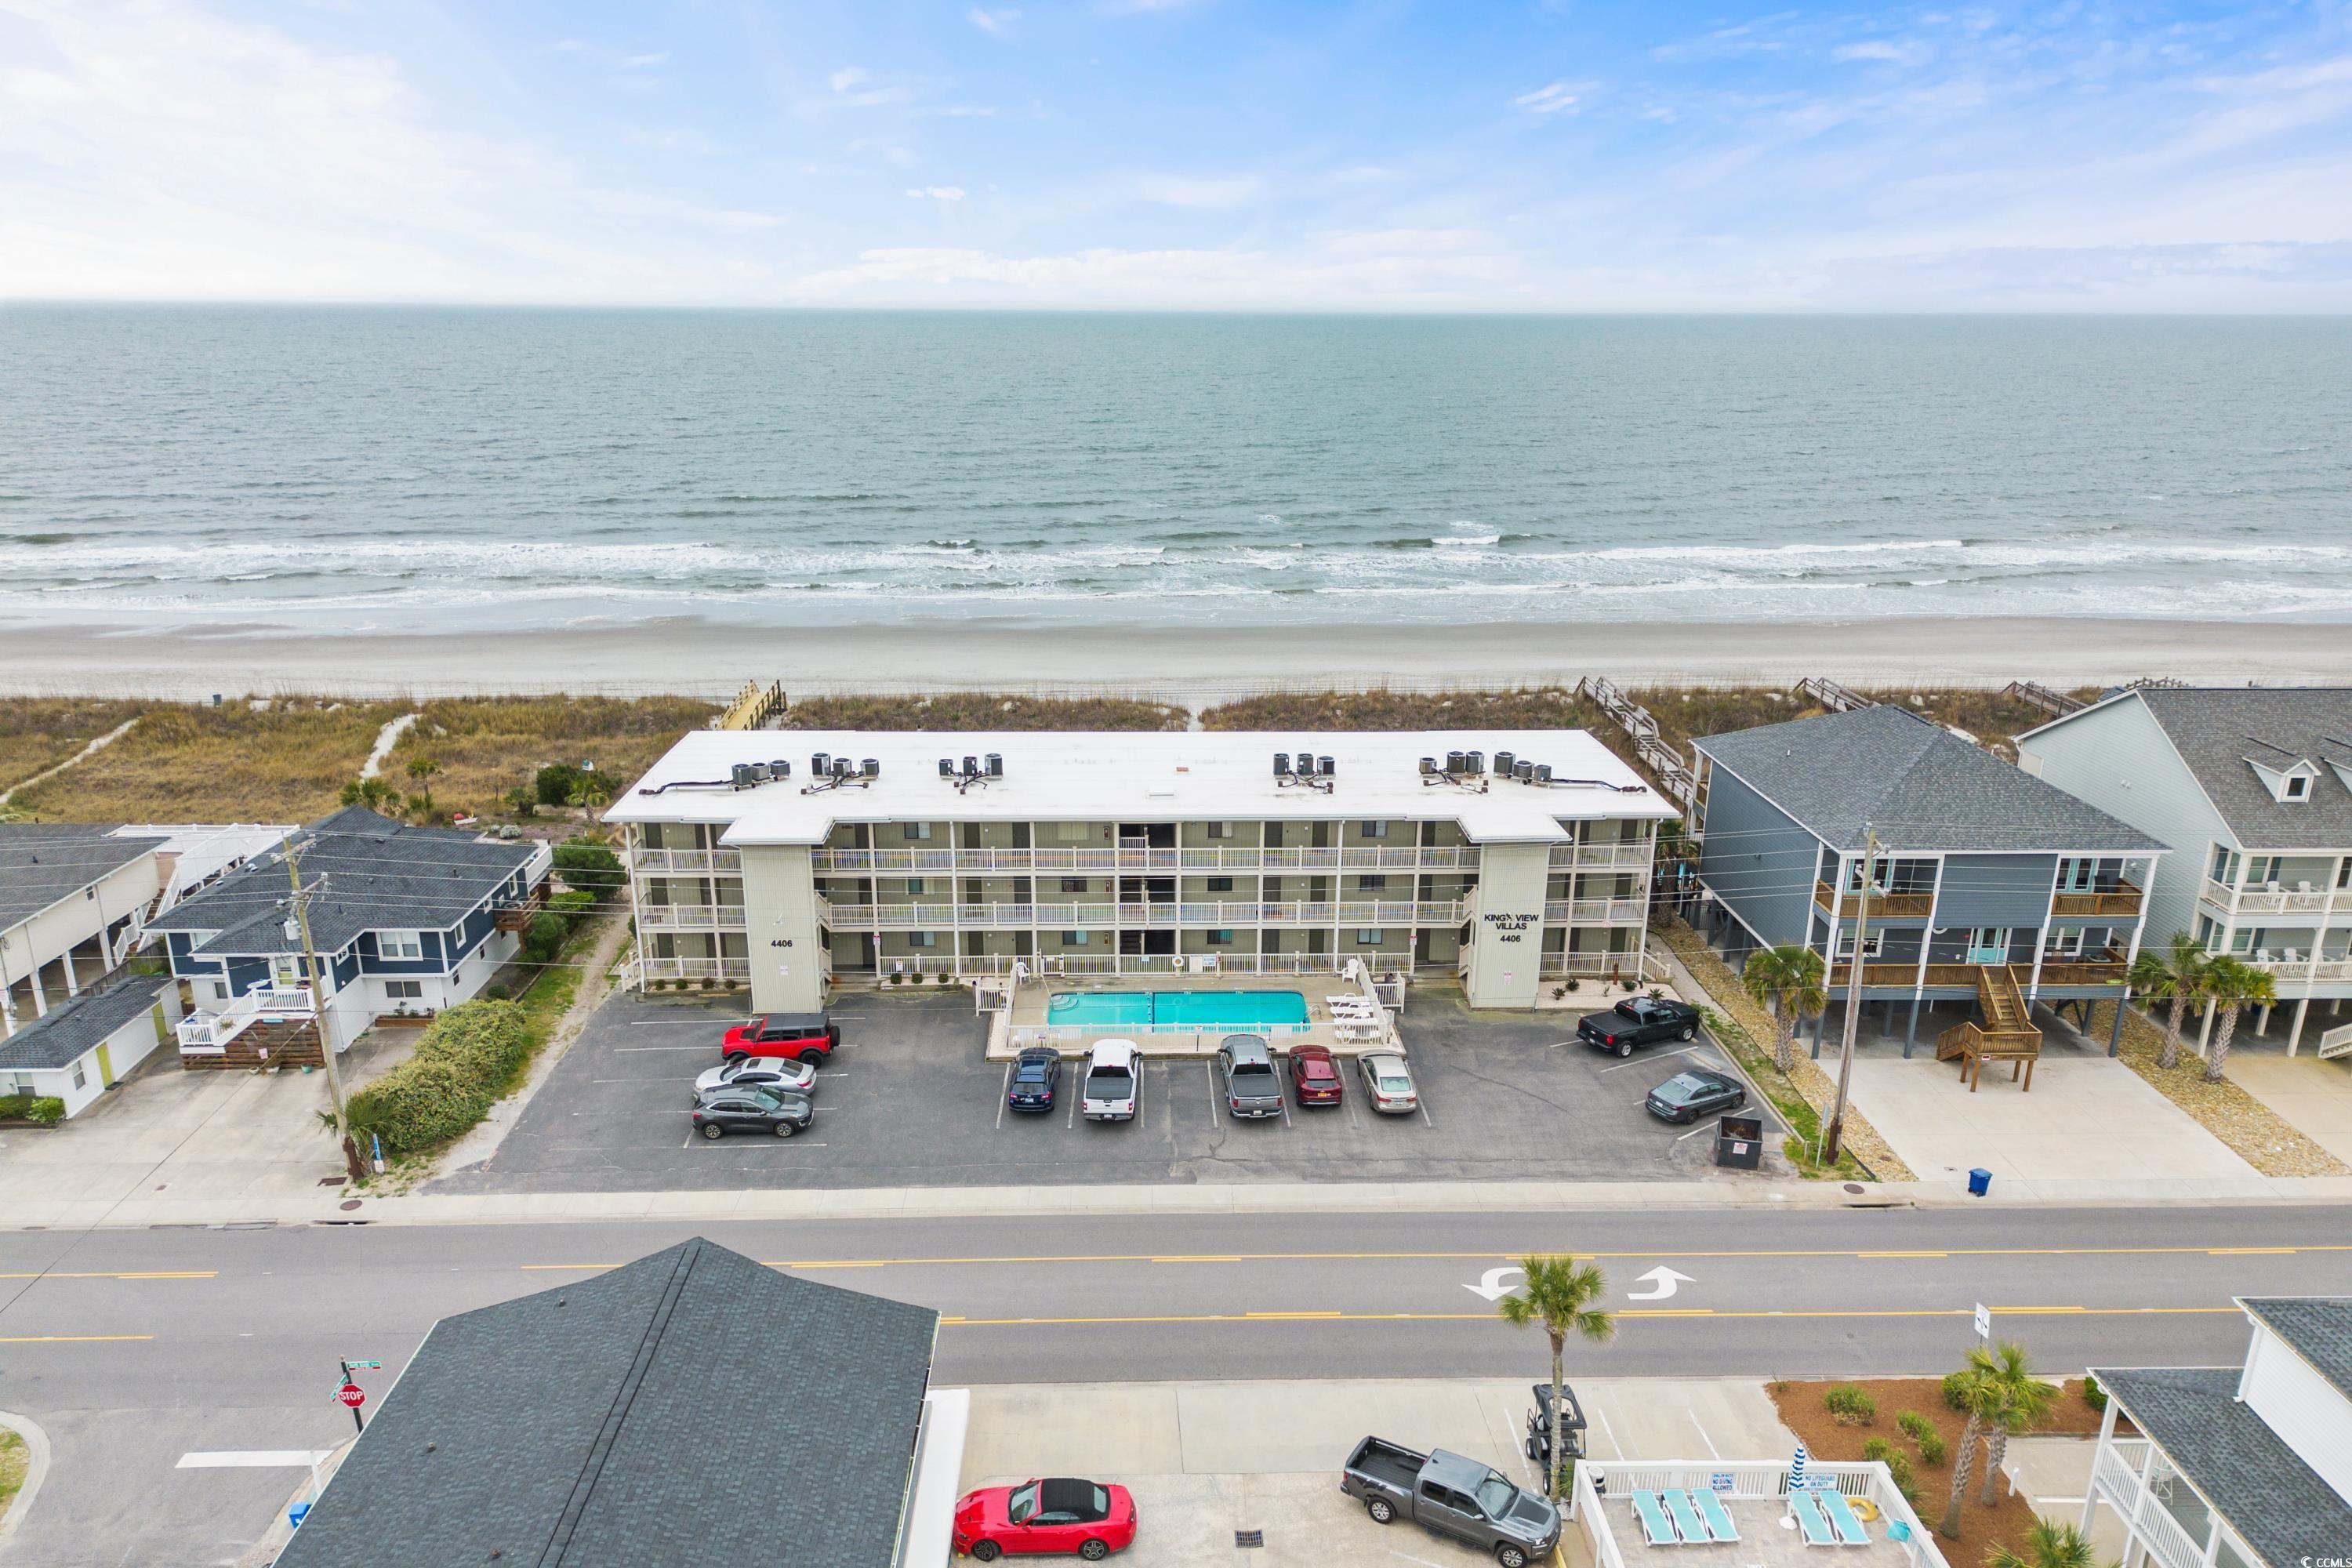 escape to your own slice of paradise with this stunning 2-bedroom oceanfront condo in the heart of north myrtle beach, south carolina. boasting breathtaking views of the atlantic ocean and pristine sandy beaches, this condo offers the ultimate coastal living experience. king's view villas is perfect for a permanent home, second home, or investment property. this condo has many features including a full kitchen, an open concept living area, spacious bedrooms, and a private balcony overlooking the ocean just to name a few. it is in a convenient location near shopping, dining, entertainment and championship golf courses. don't miss out on this rare opportunity to own your own piece of paradise in cherry grove. contact myself or your agent to schedule a private showing.